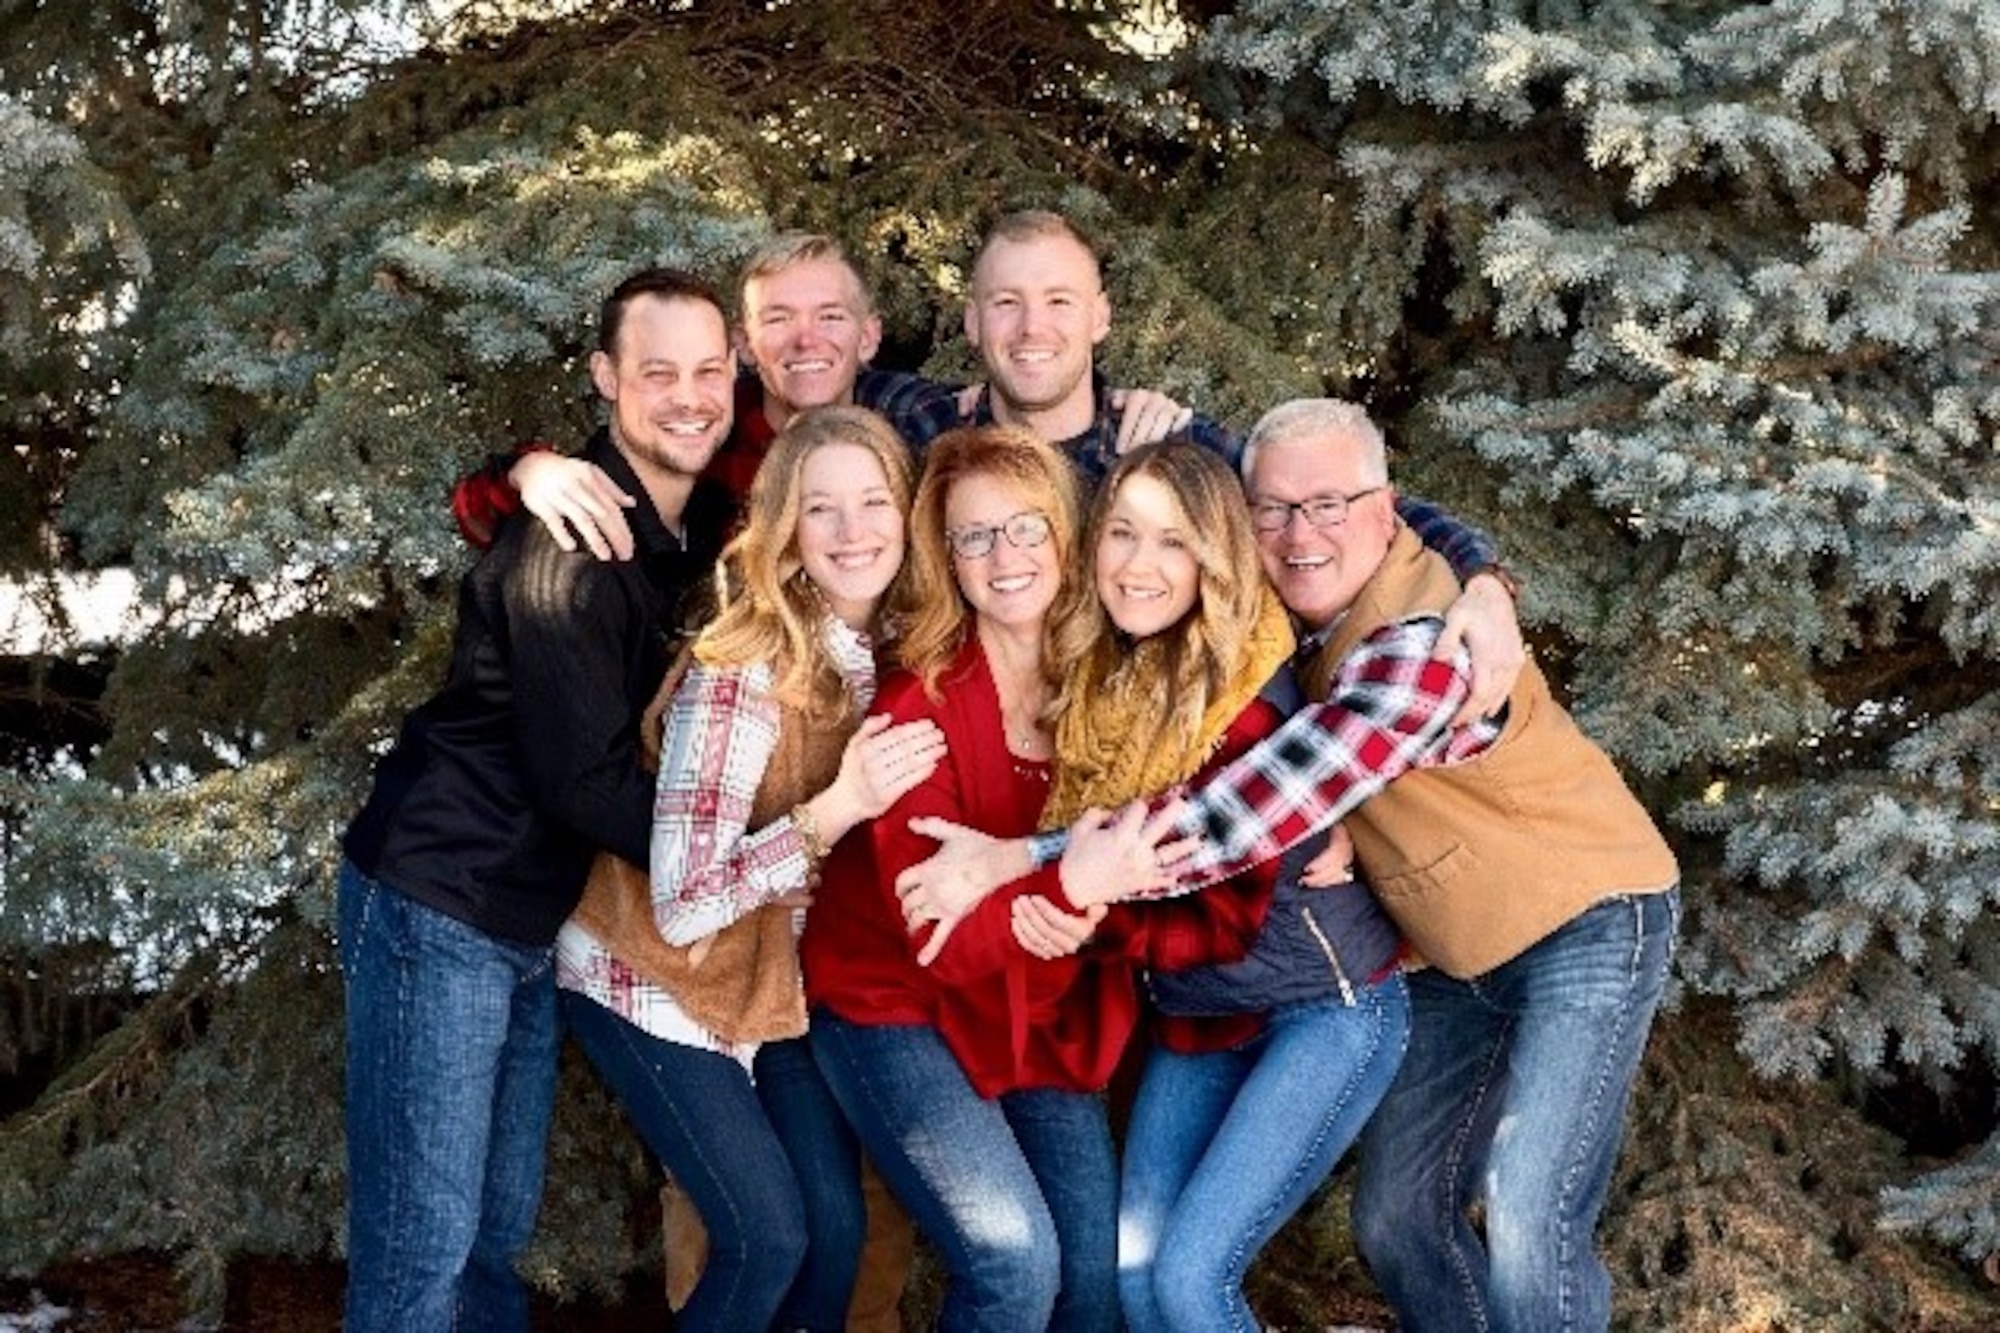 Fink’s immediate family (front row L/R) MaKayla Donahue, his older sister, Rhonda Fink, his mother, Cami Fink his wife, Richard Fink his father, (back row L/R) Marshall Donahue, his brother in-law, Connor Fink his younger brother, and Capt. Fink. (Courtesy photo)